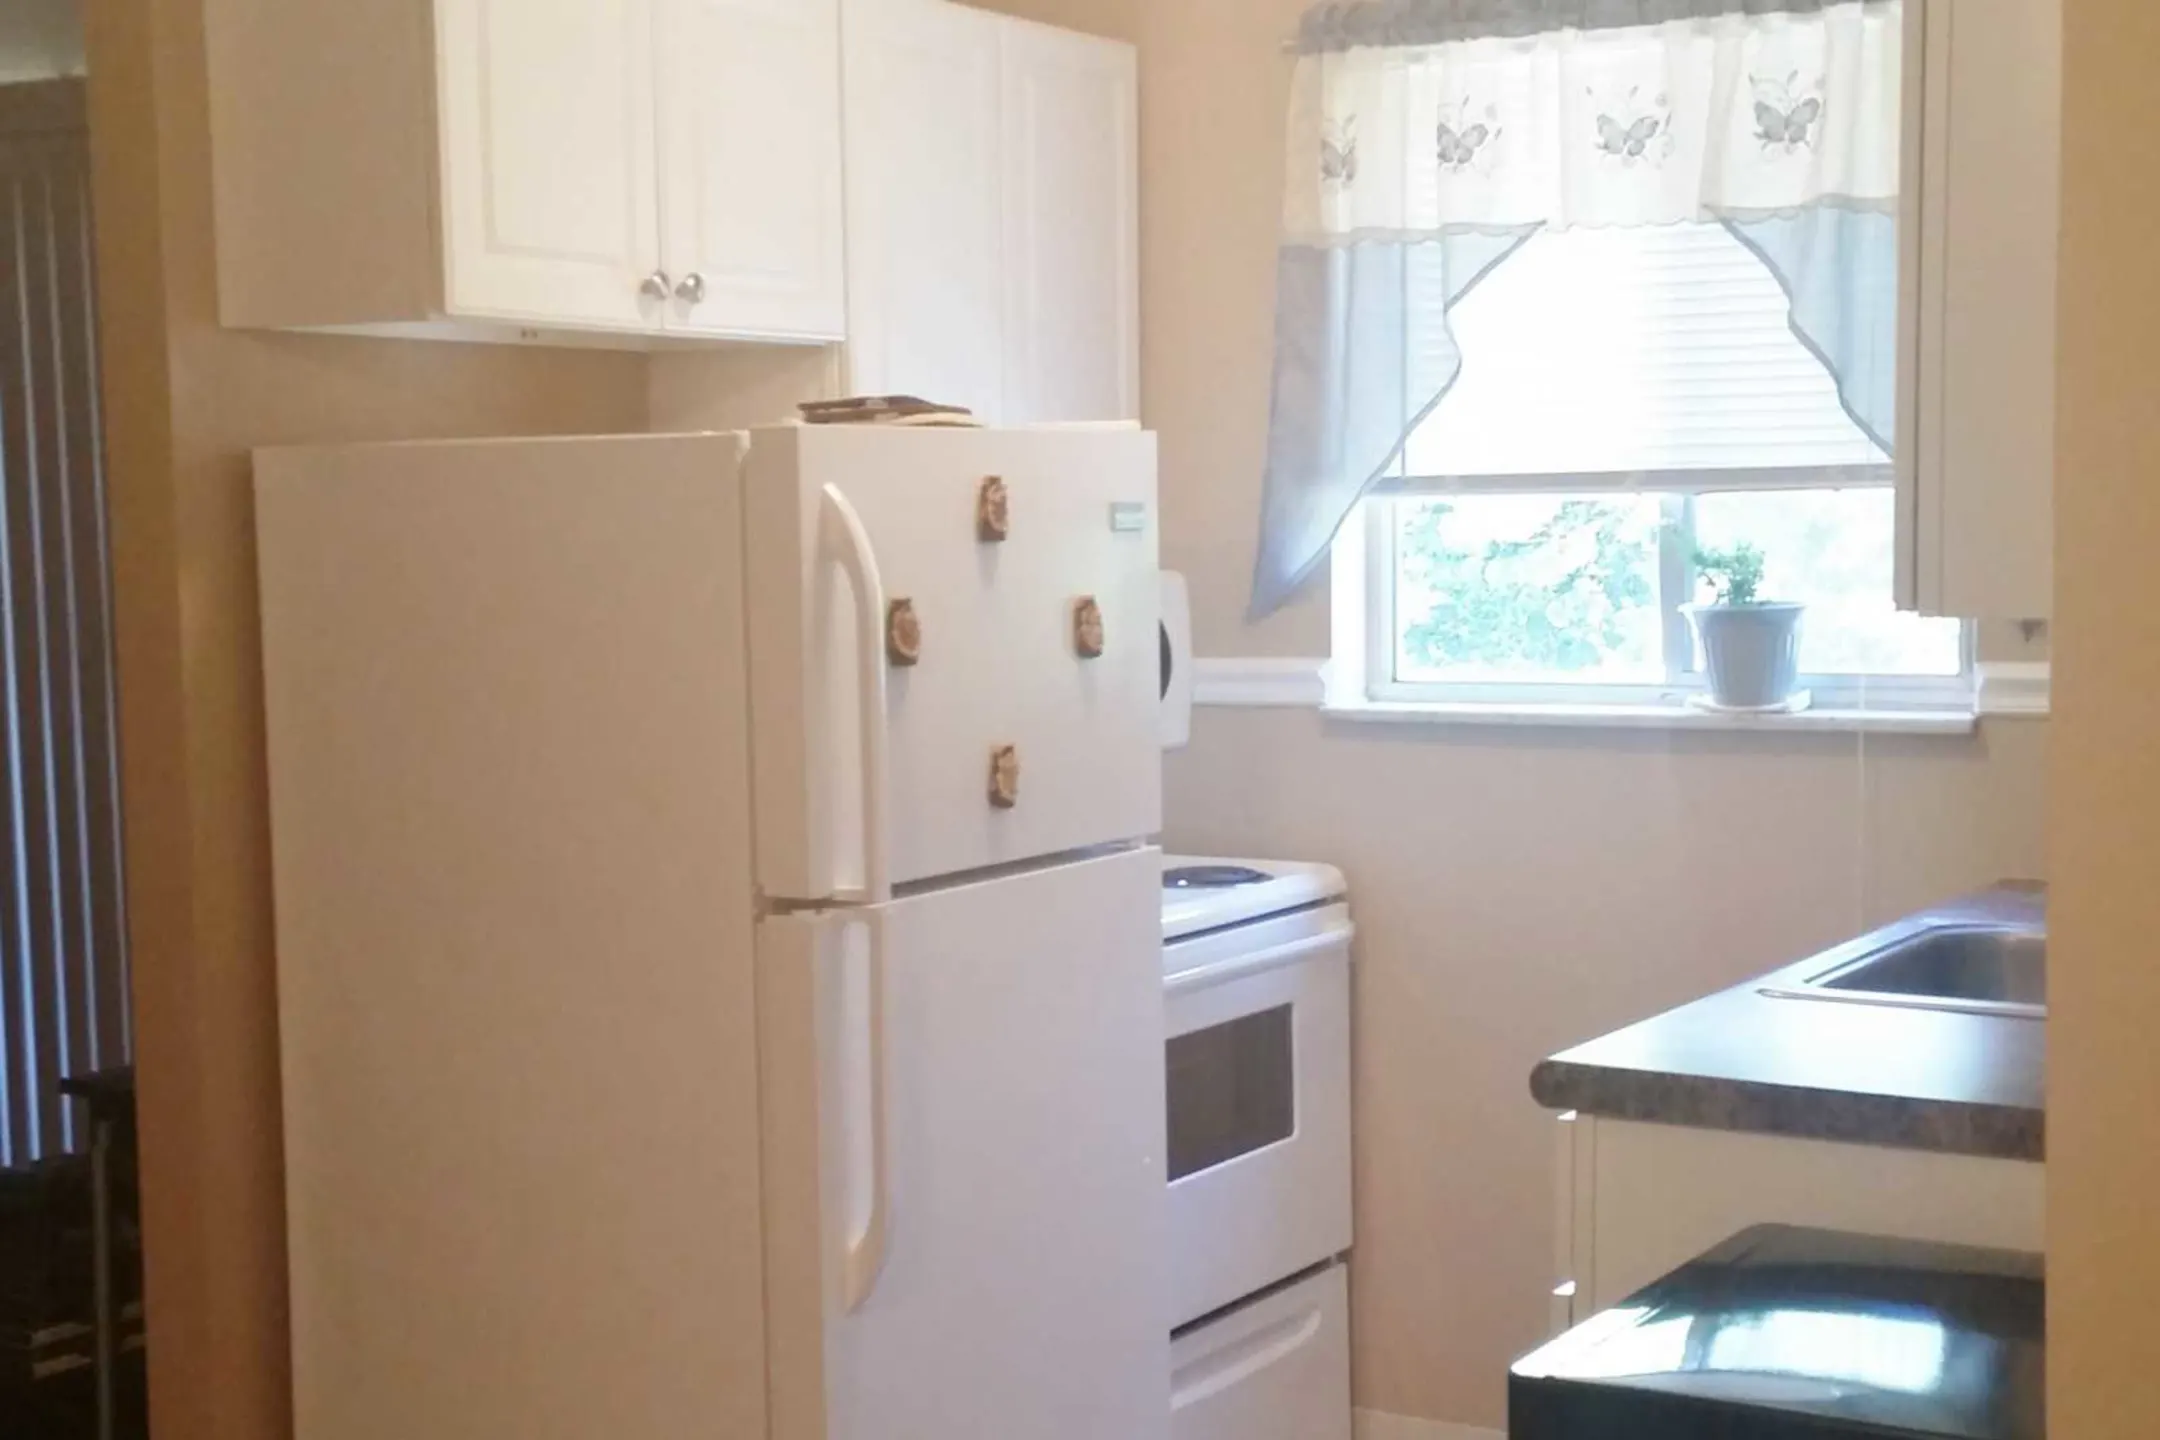 Kitchen - Harbor View Apartments - Addyston, OH